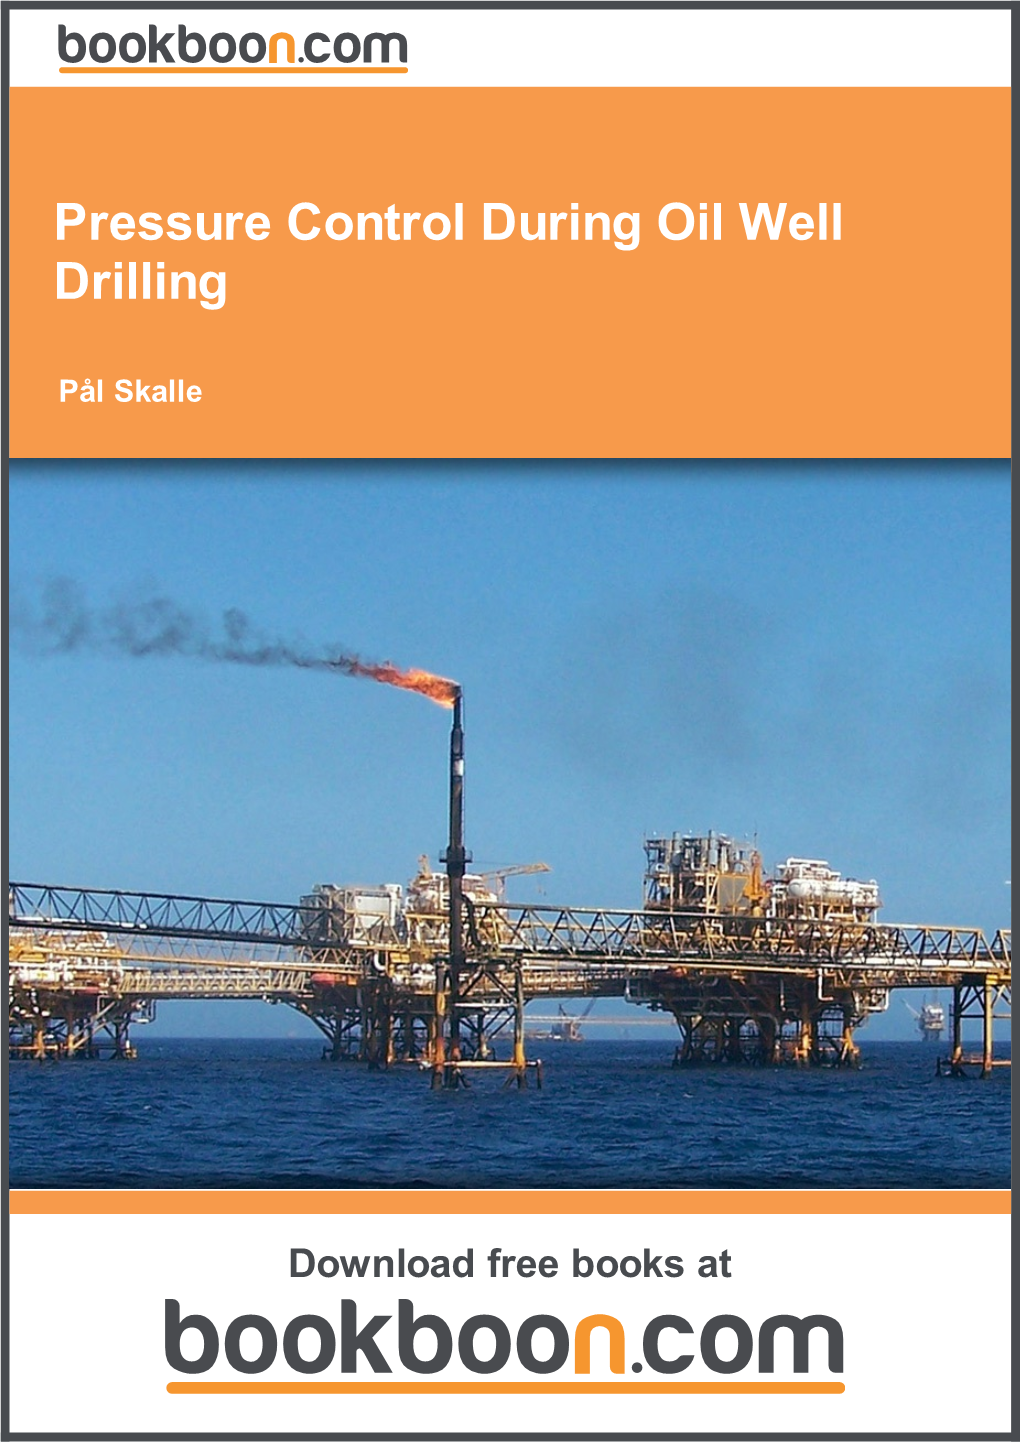 Pressure Control During Oil Well Drilling